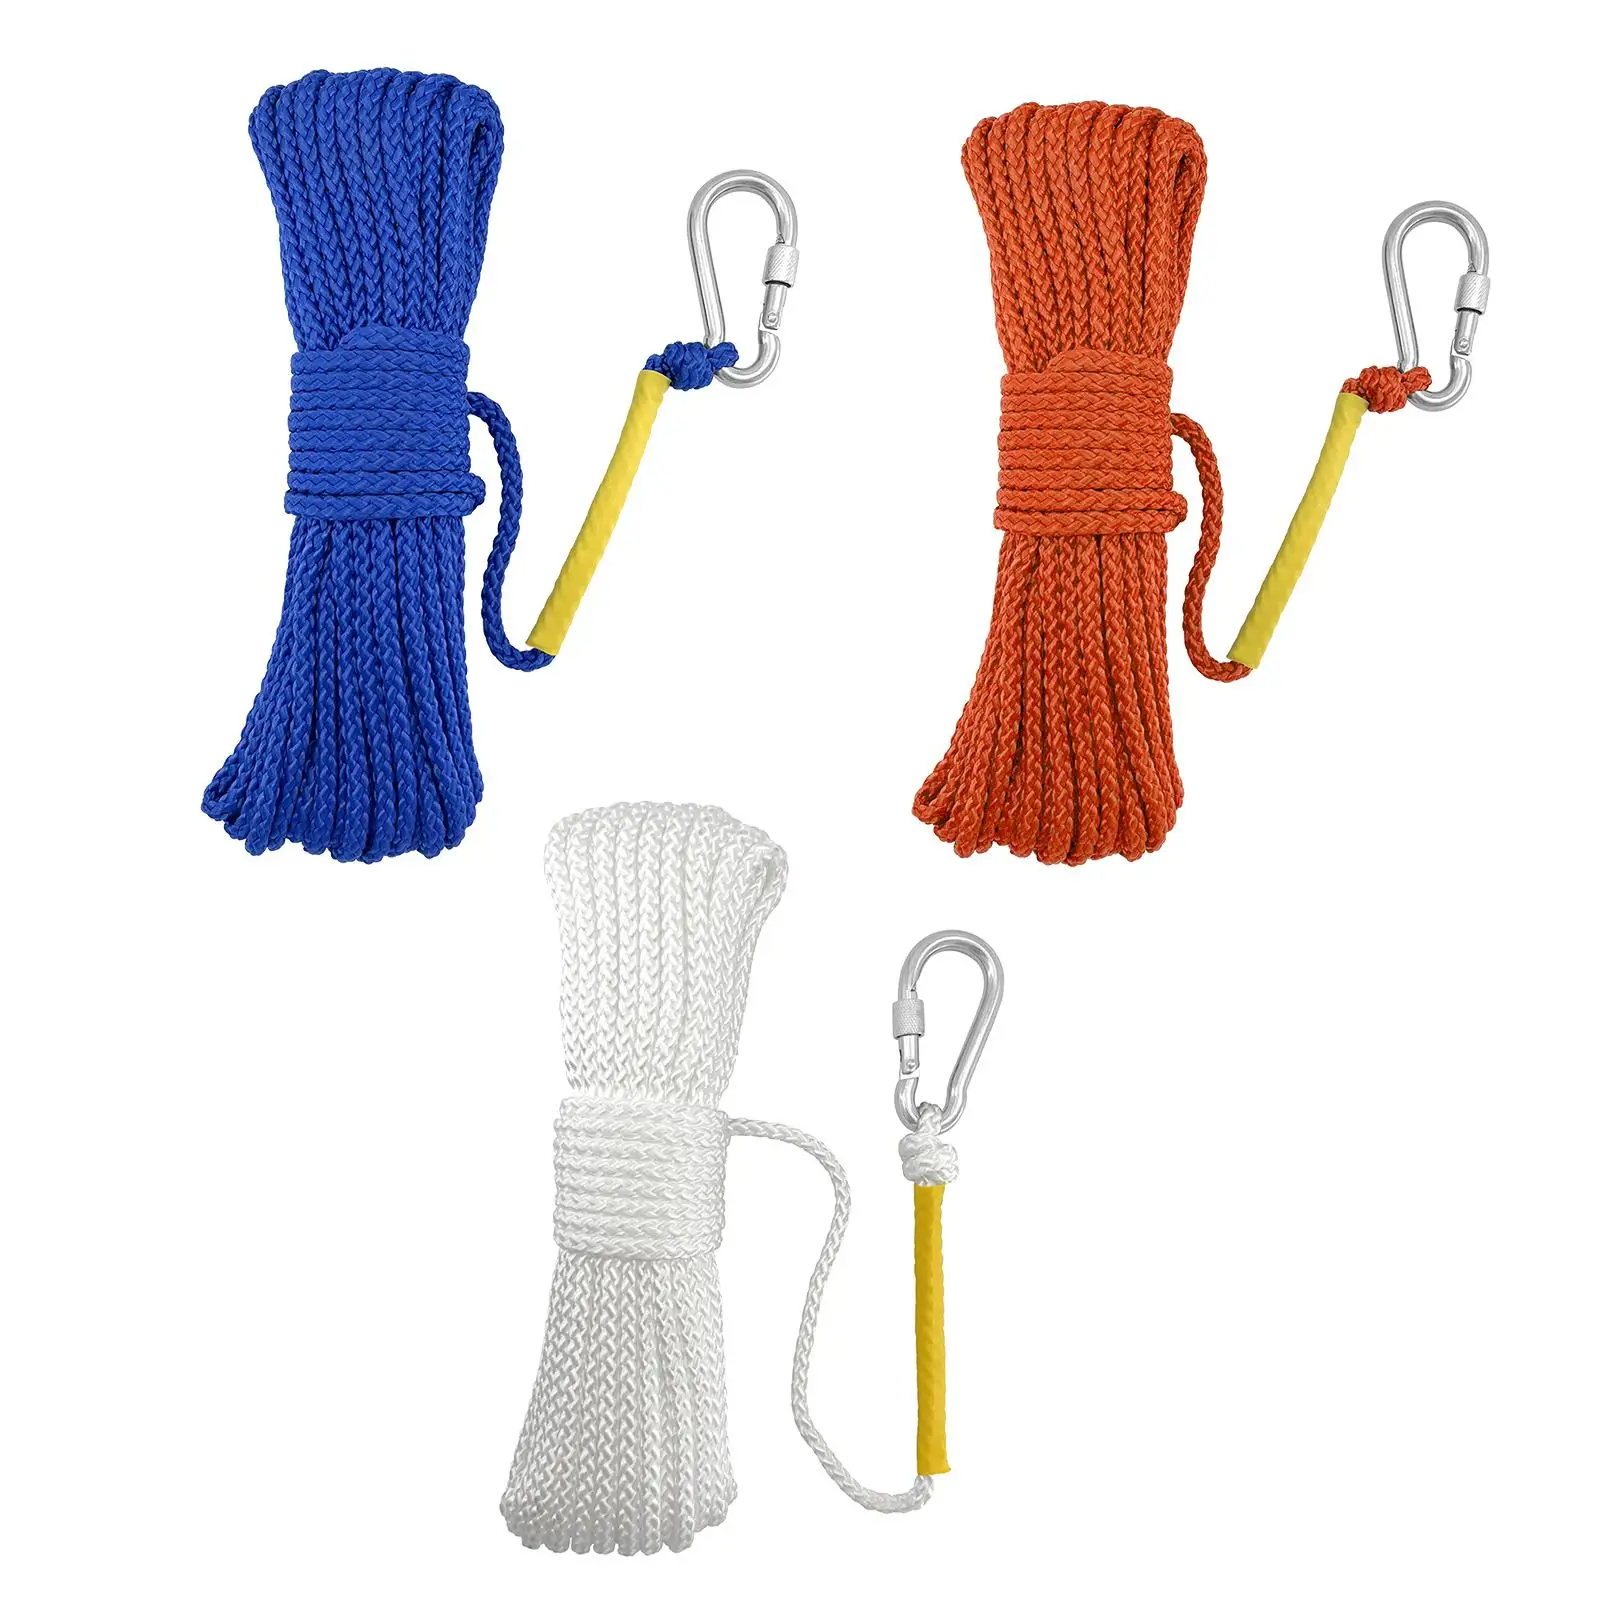 Fishing Nylon Rope, with Spring Hook for Magnet Fishing Crafting Boat Anchor